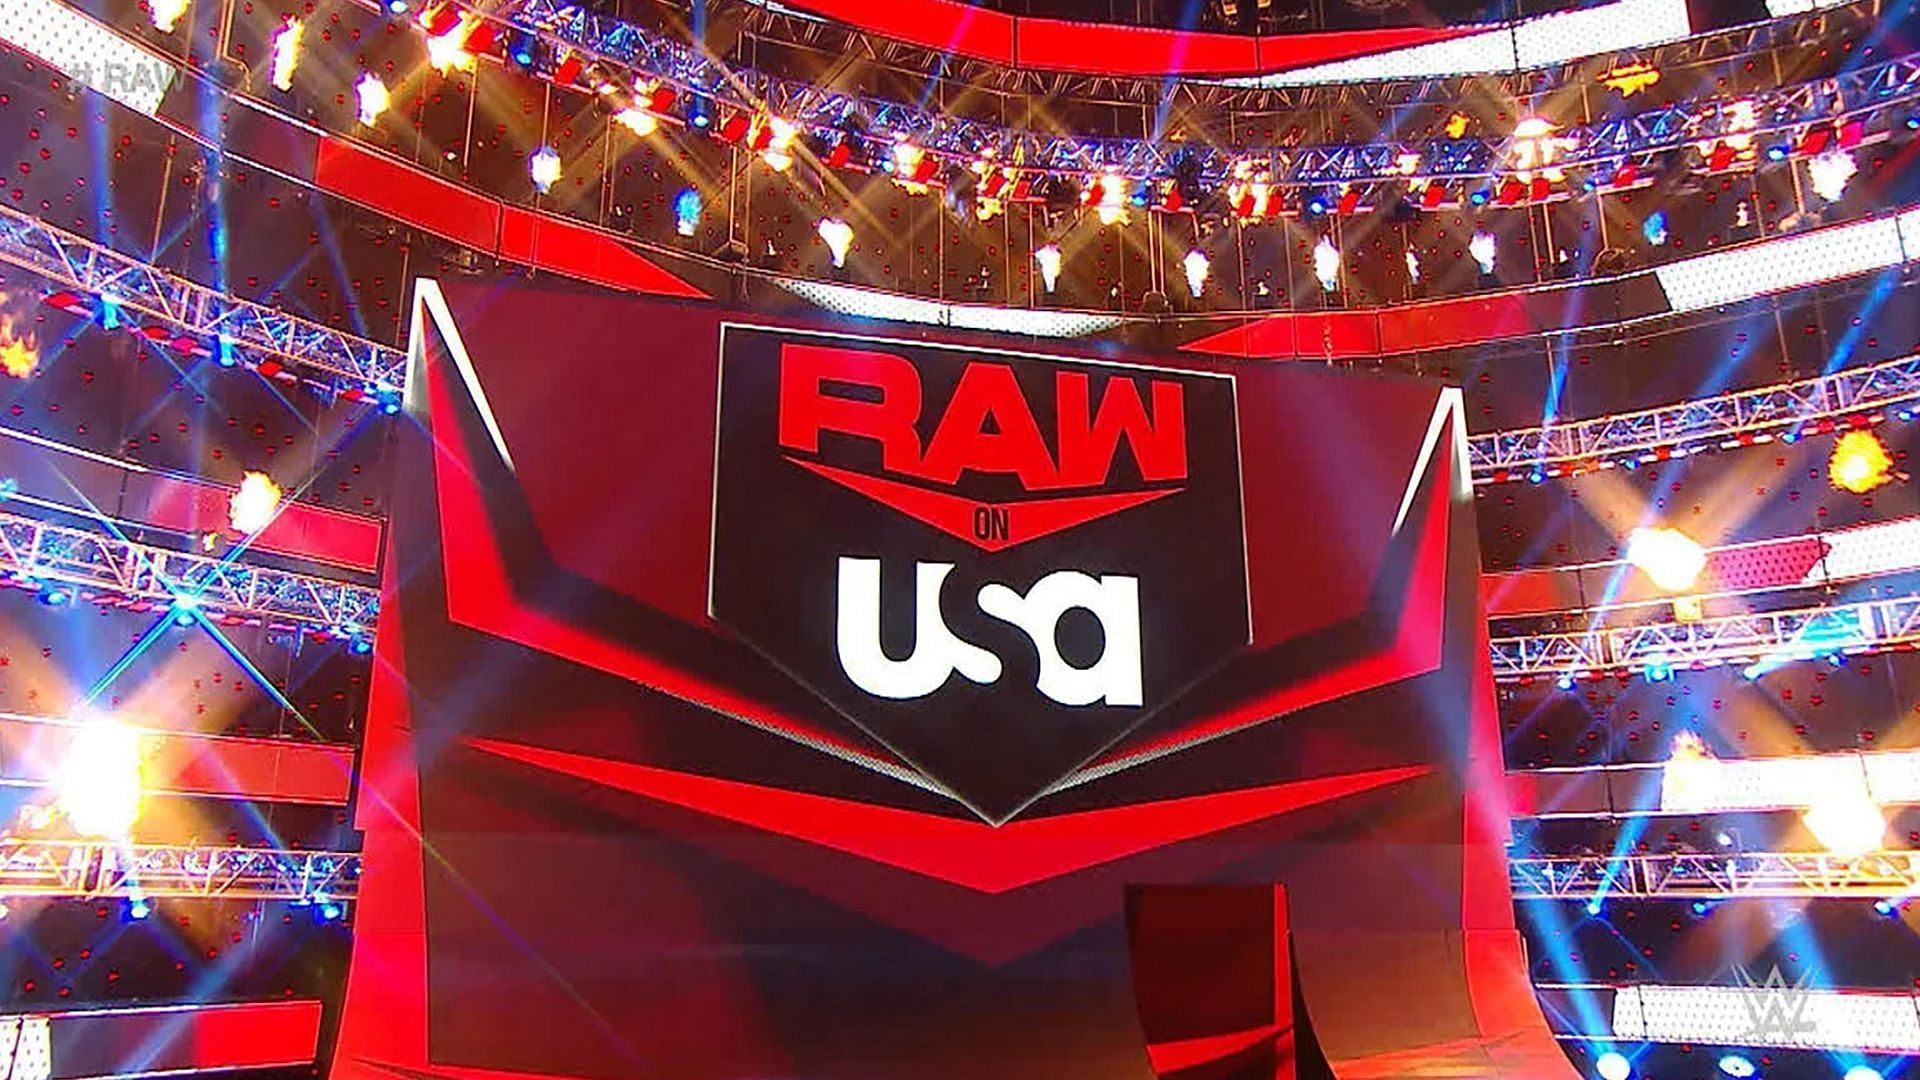 The logos for WWE RAW and the USA Network